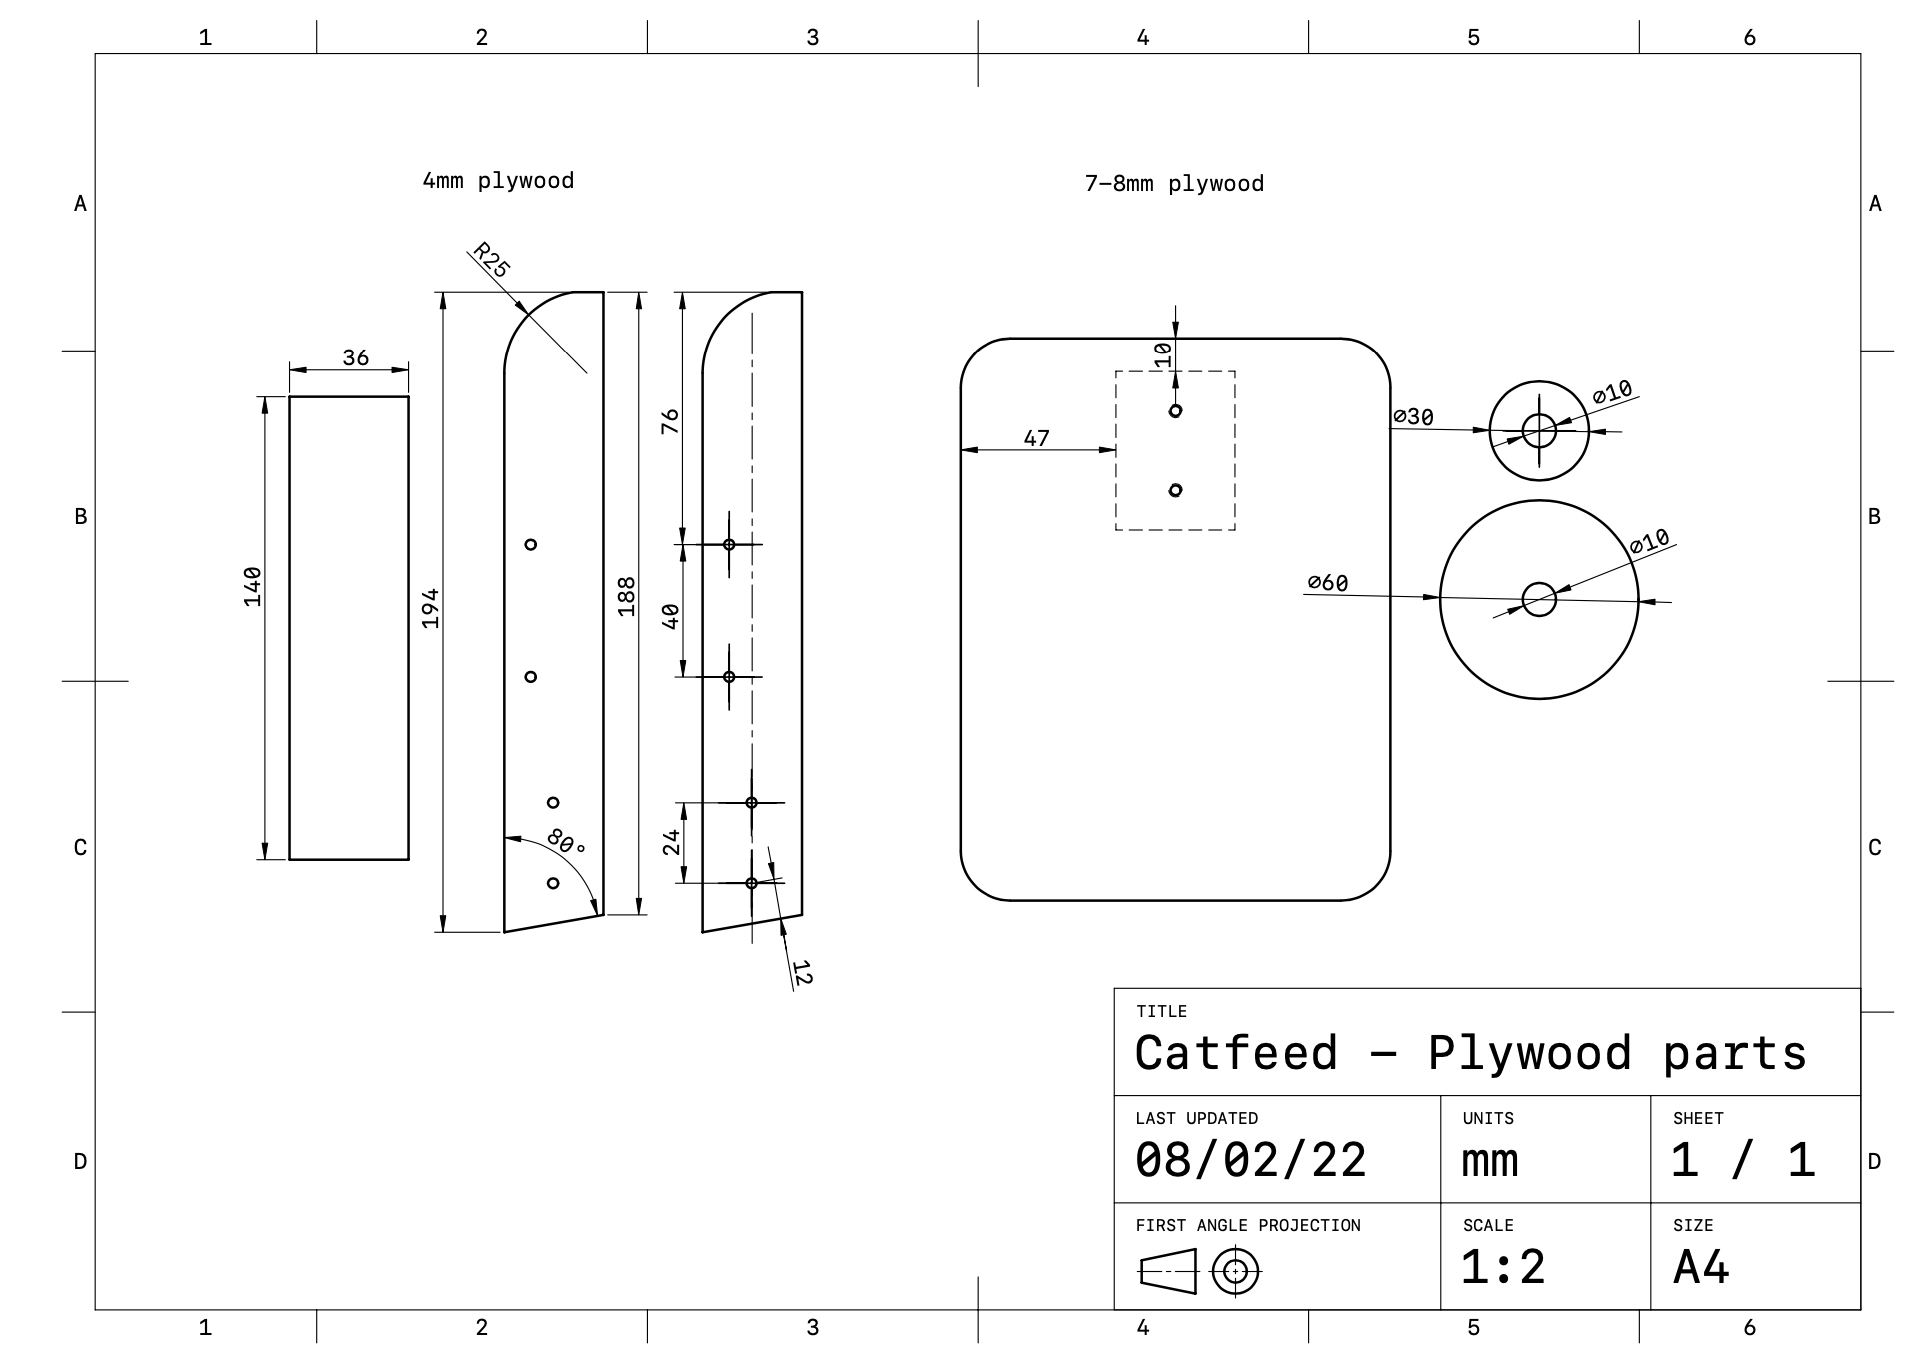 Catfeed - Plywood parts.png